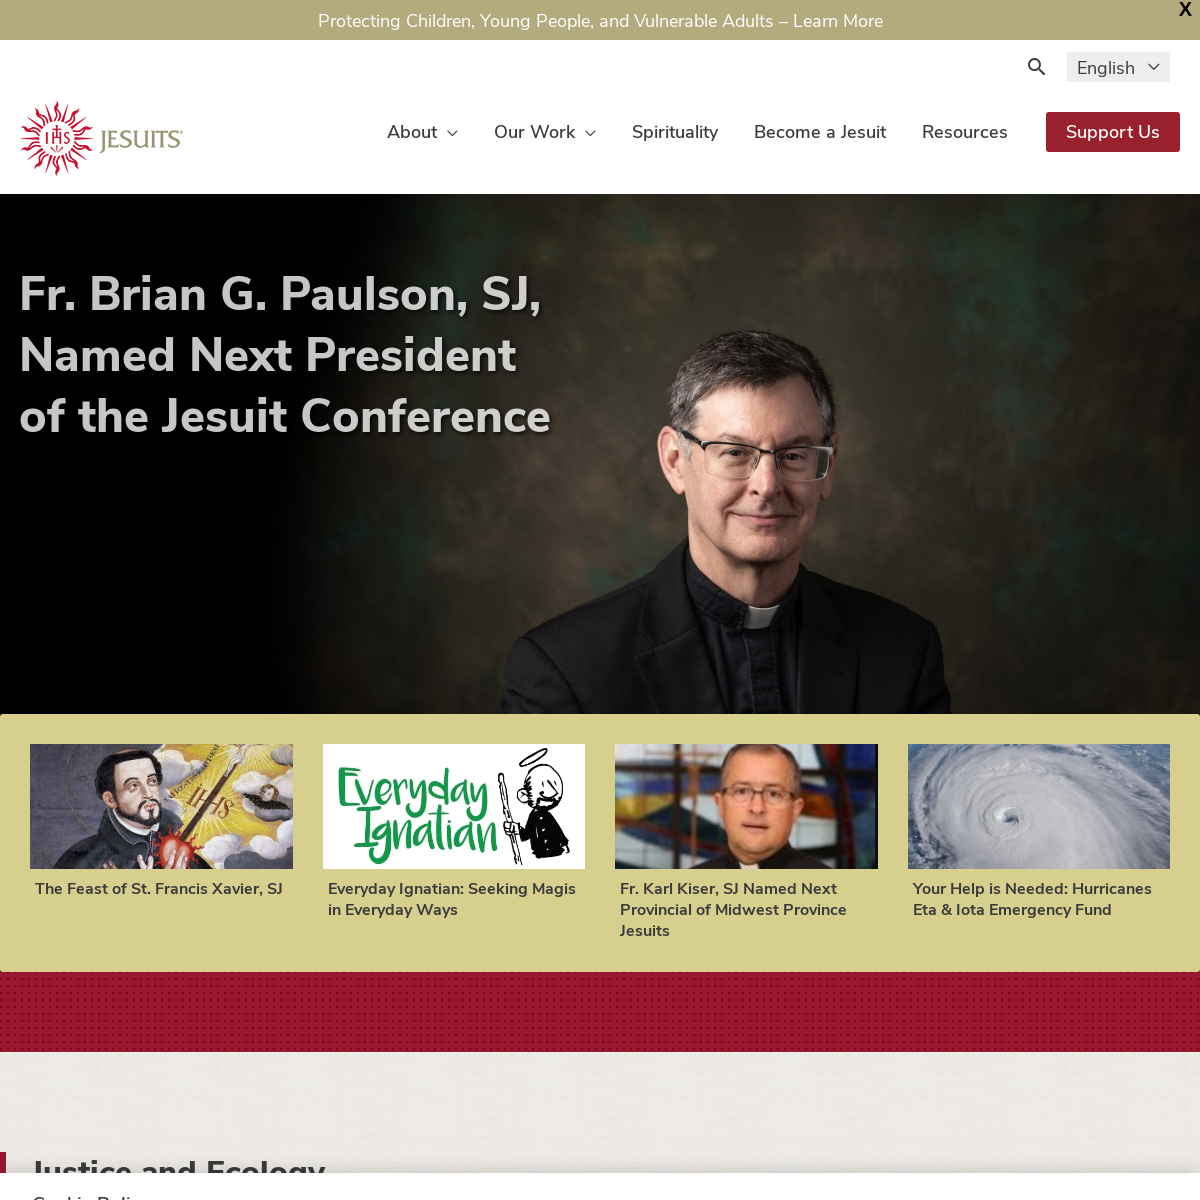 A complete backup of jesuits.org